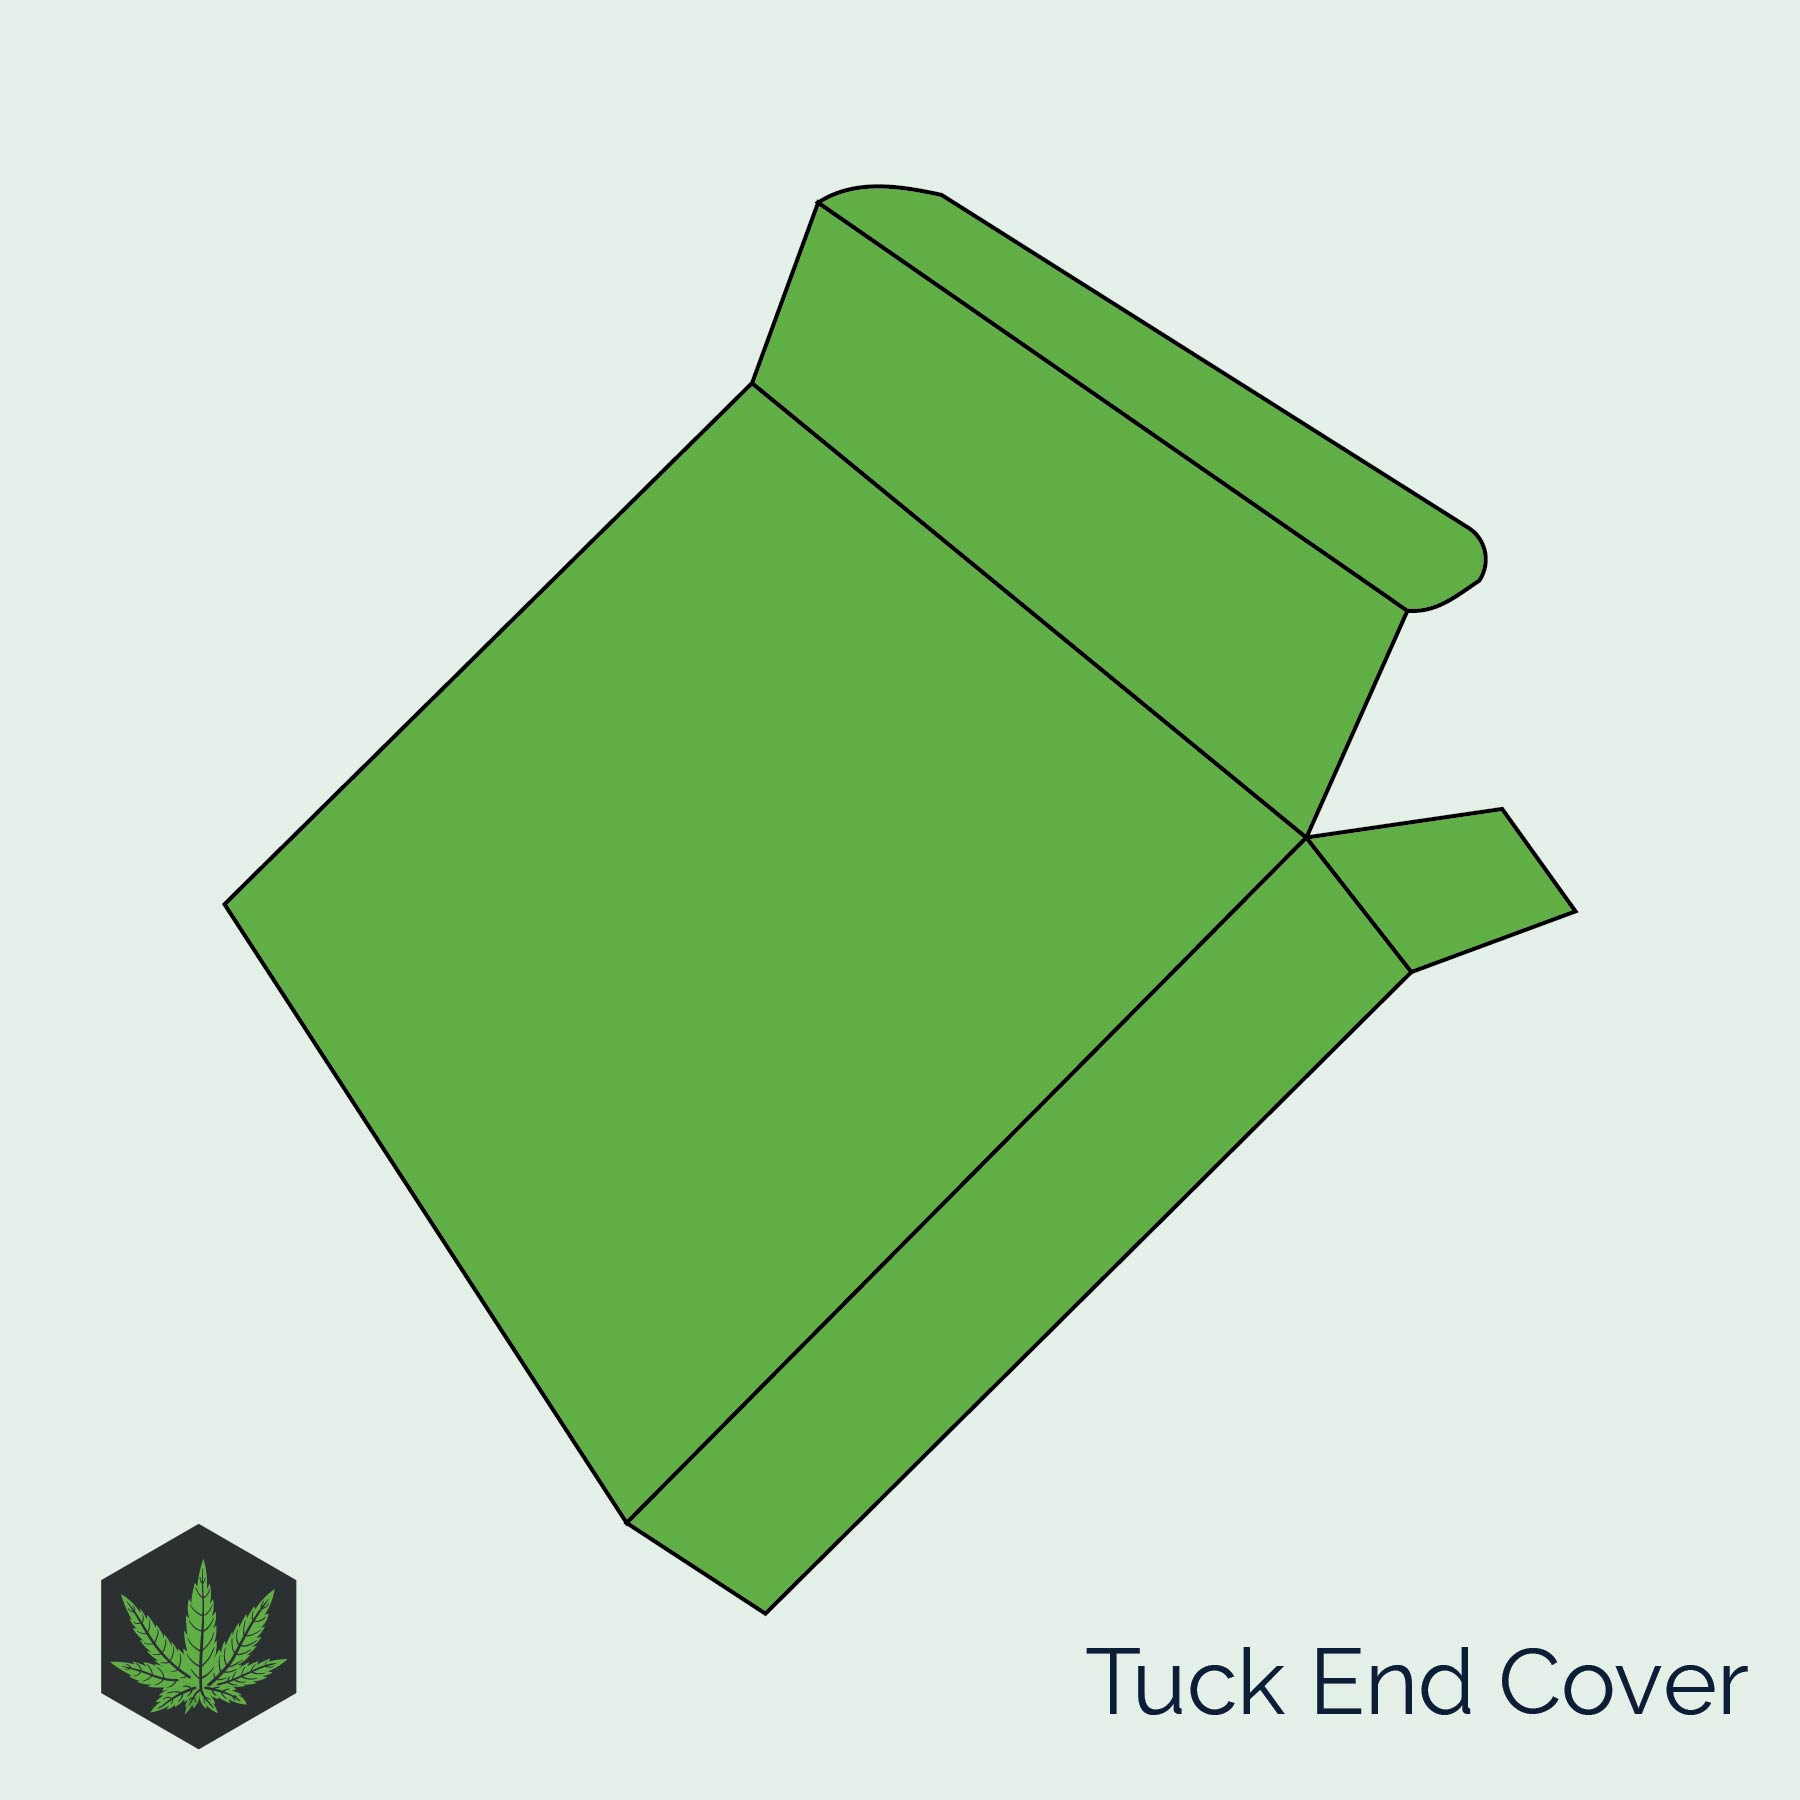 Tuck End Cover Packaging